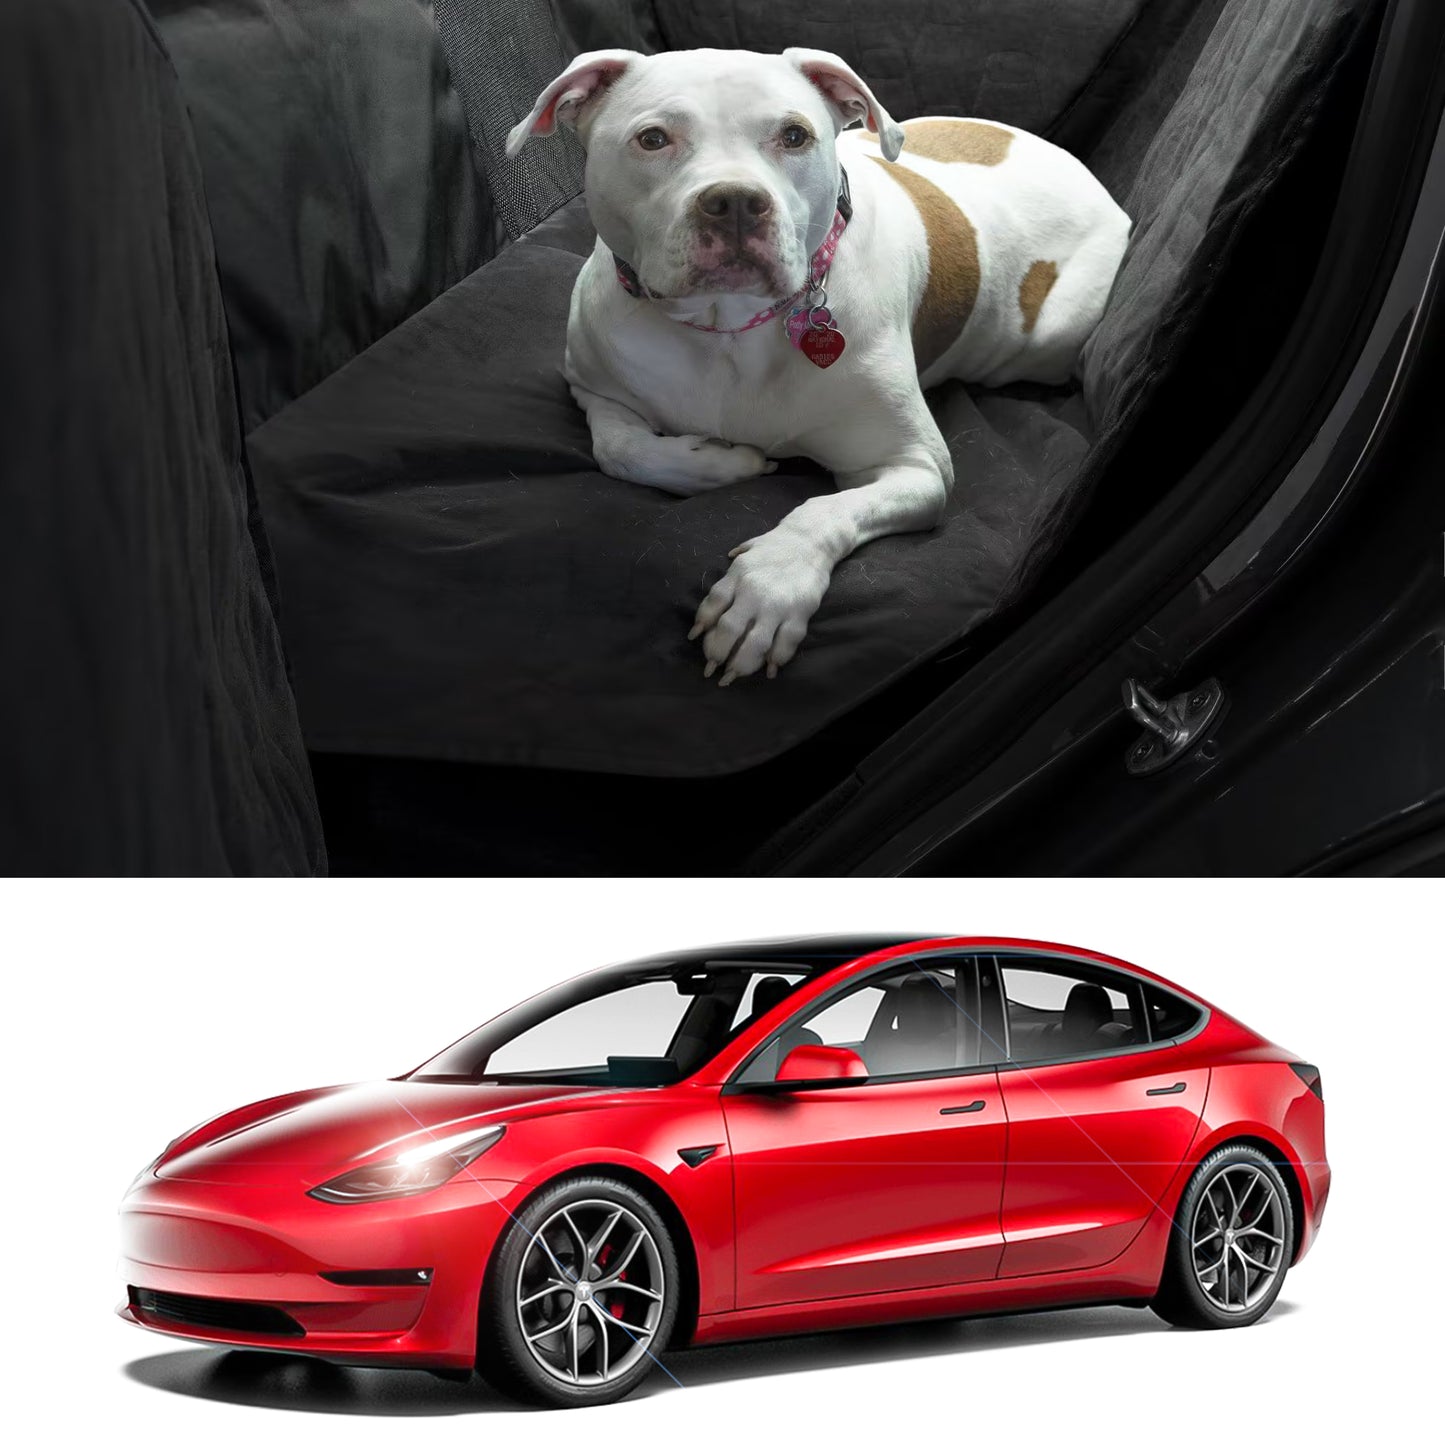 tesla model 3 Y S car 2022 2023 2021 2020 2019 s3y arcoche accessories accessory Liner Pet Protector Seat Cushion Designed exclusively for the second row made from a breathable quilted fleece material make maximum comfort for your pet during car trip or while relaxing in Dog Mode.